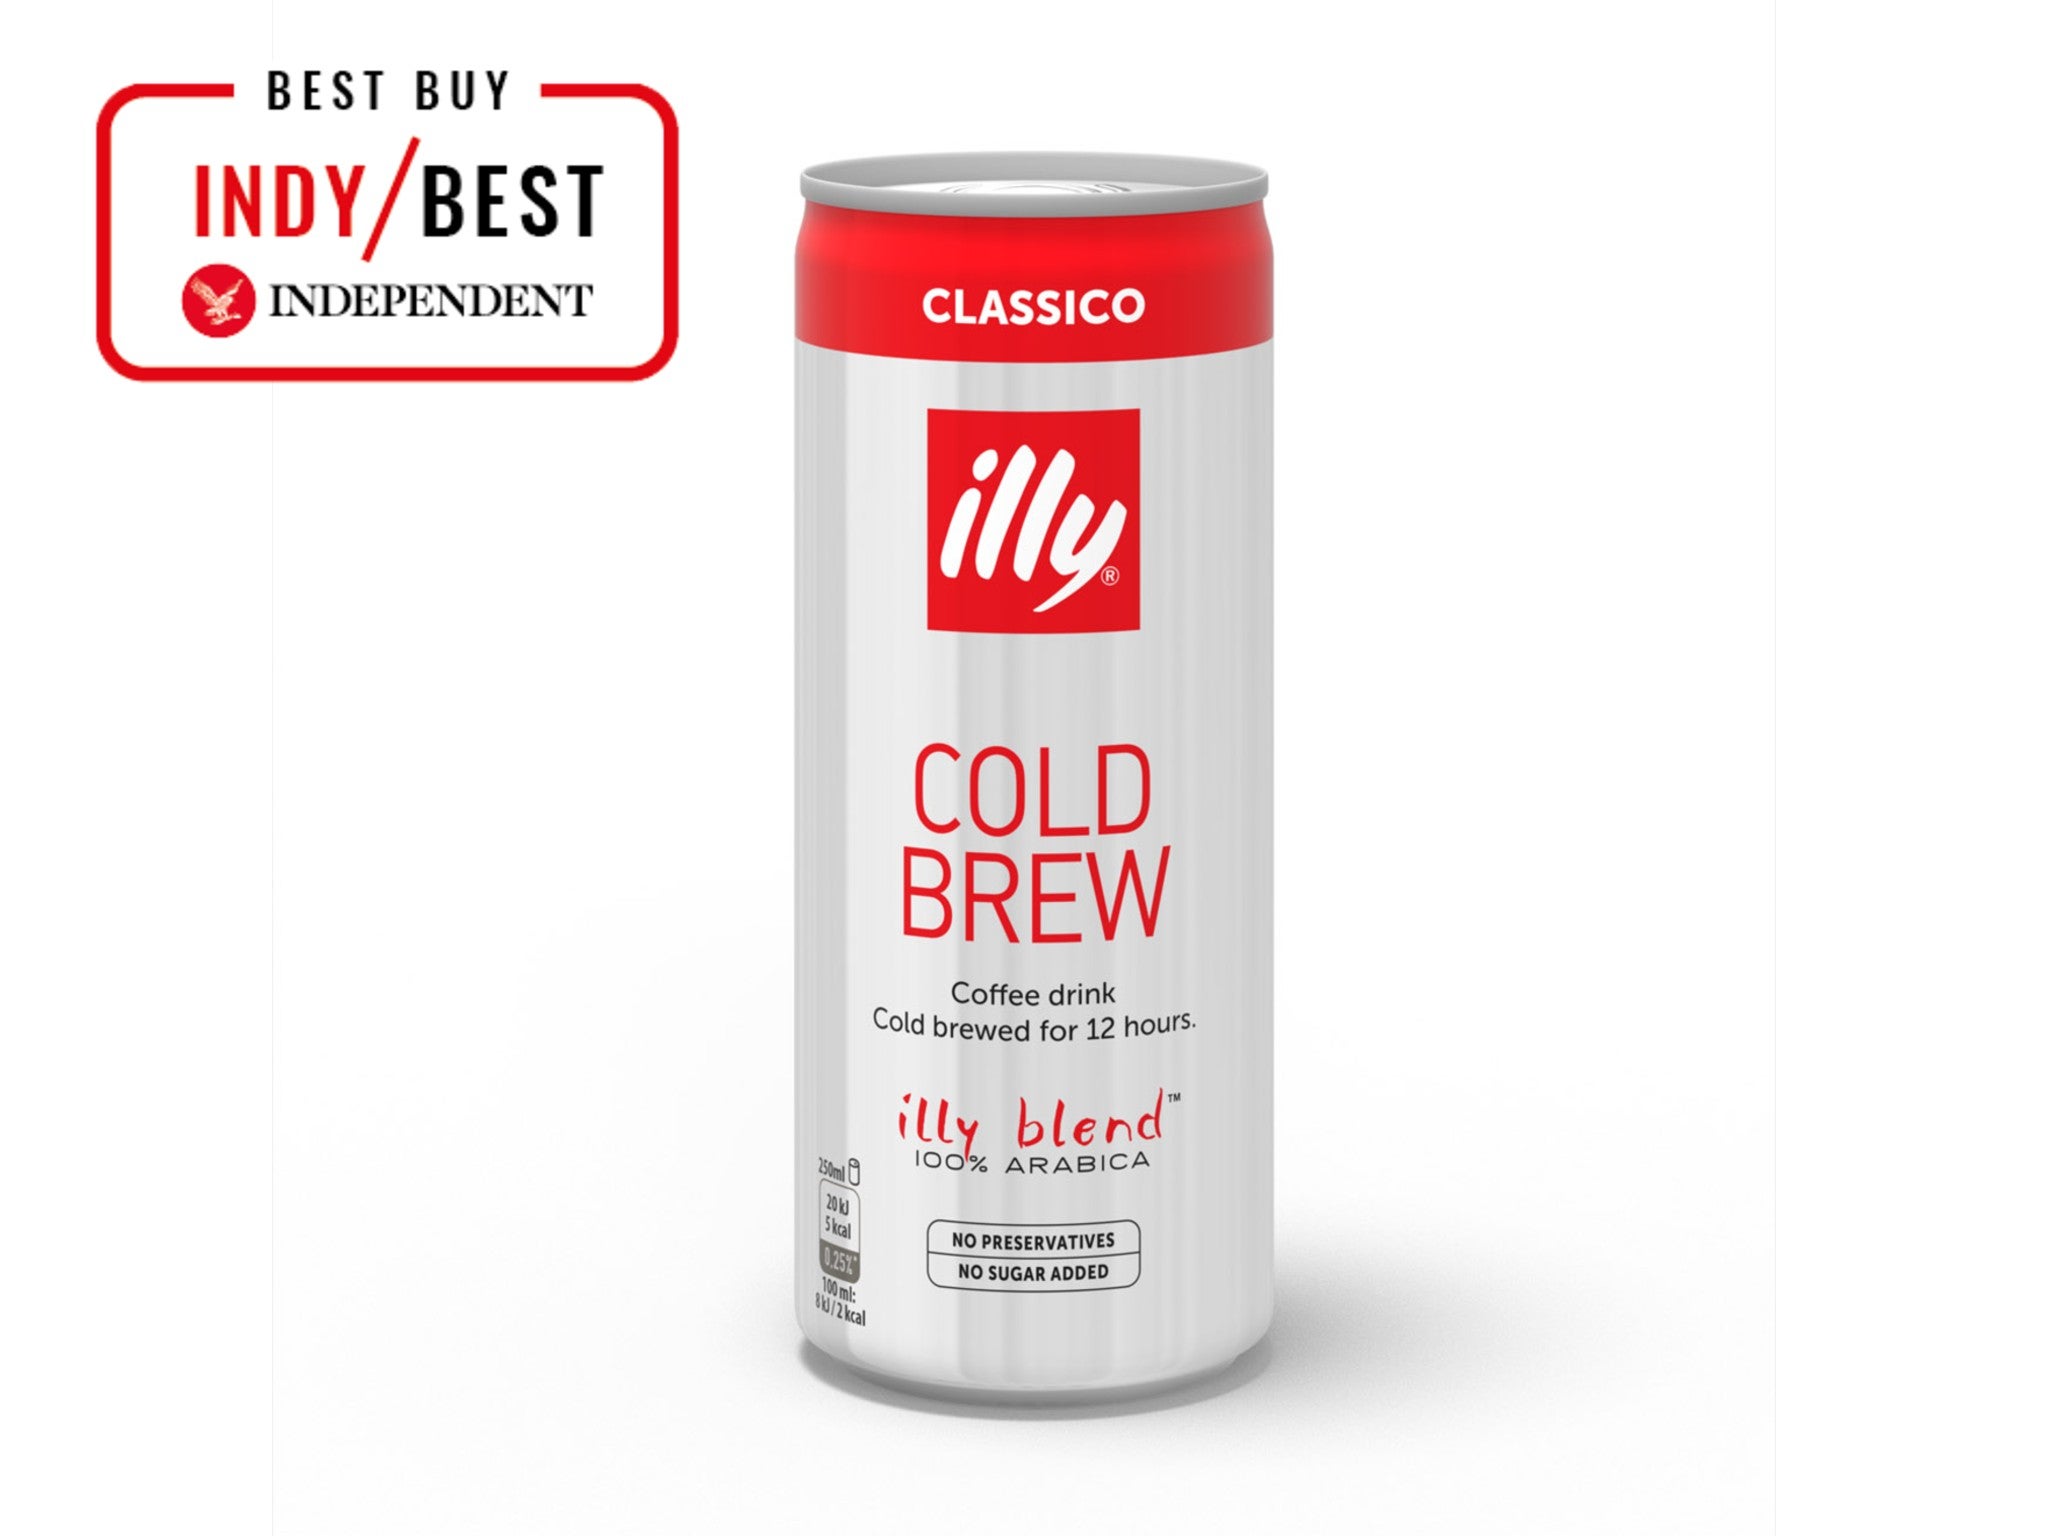 Illy cold brew ready to drink classico indybest.jpeg